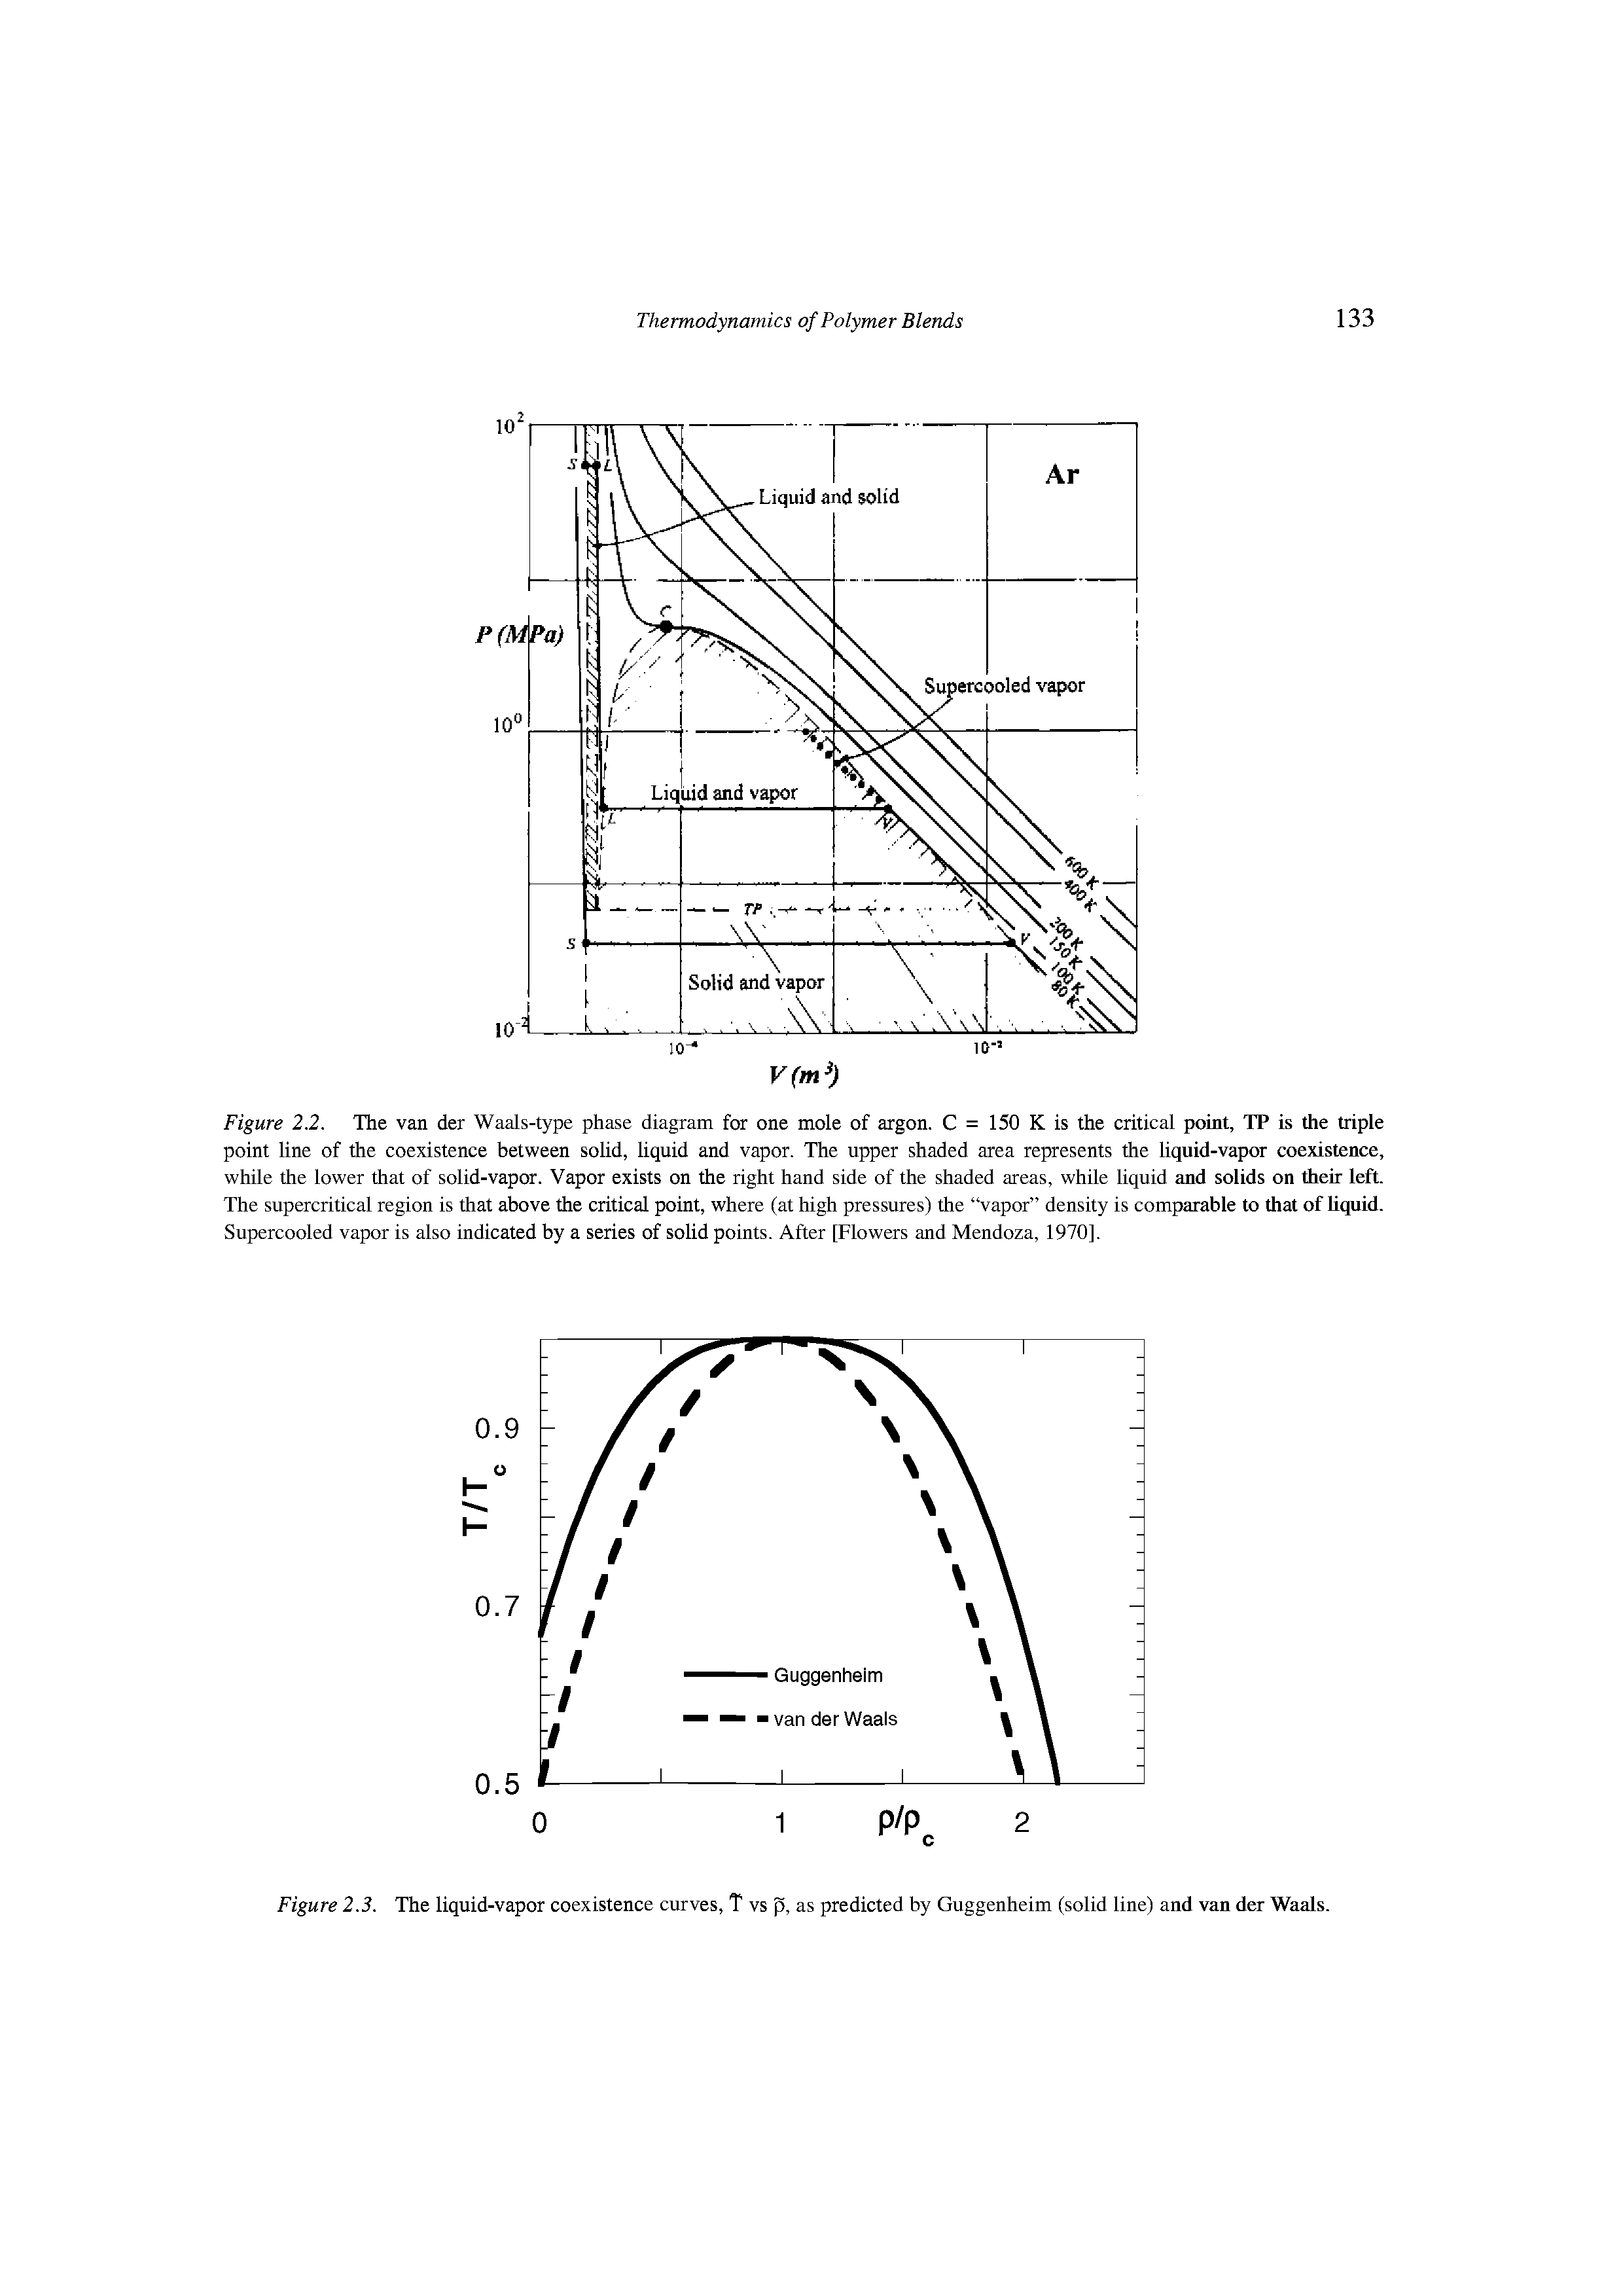 Figure 2.2. The van der Waals-type phase diagram for one mole of argon. C = 150 K is the critical point, TP is the triple point line of the coexistence between solid, liquid and vapor. The upper shaded area represents the liquid-vapor coexistence, while the lower that of solid-vapor. Vapor exists on the right hand side of the shaded areas, while liquid and solids on their left. The supercritical region is that above the critical point, where (at high pressures) the vapor density is comparable to that of liquid. Supercooled vapor is also indicated by a series of solid points. After [Flowers and Mendoza, 1970].